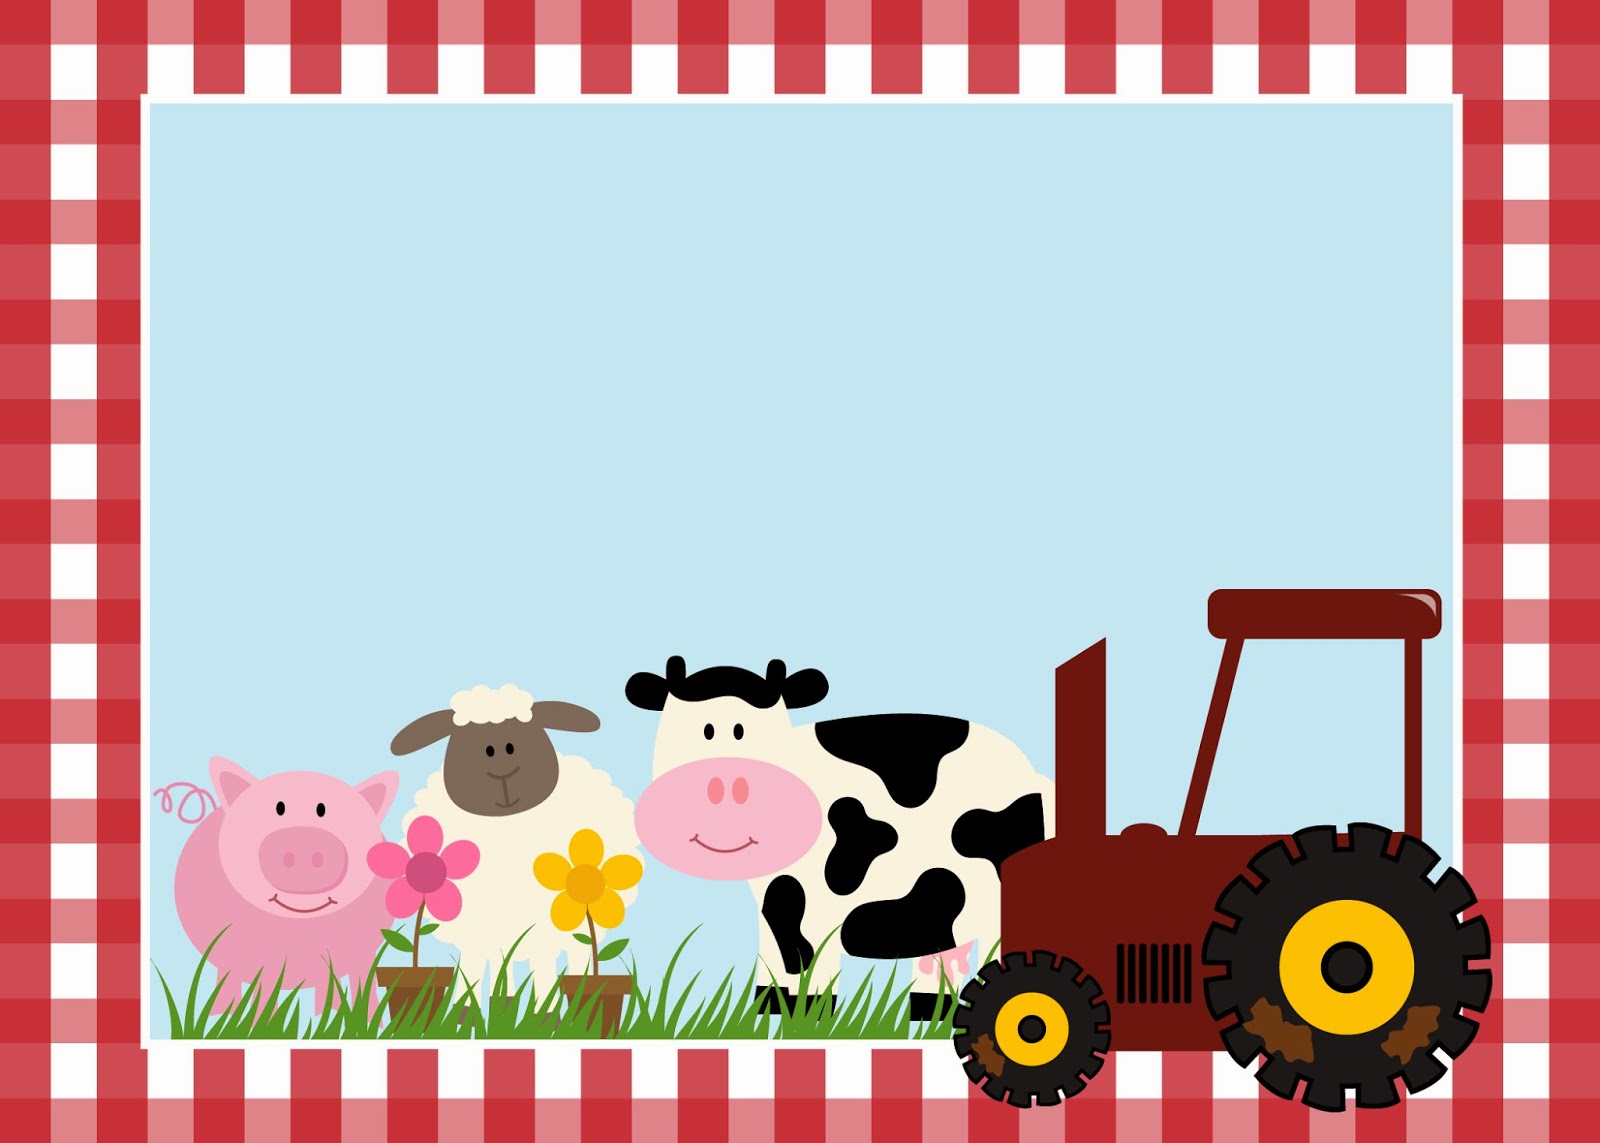 Free Printable Farm Party Invitations. Oh My Fiesta! in english